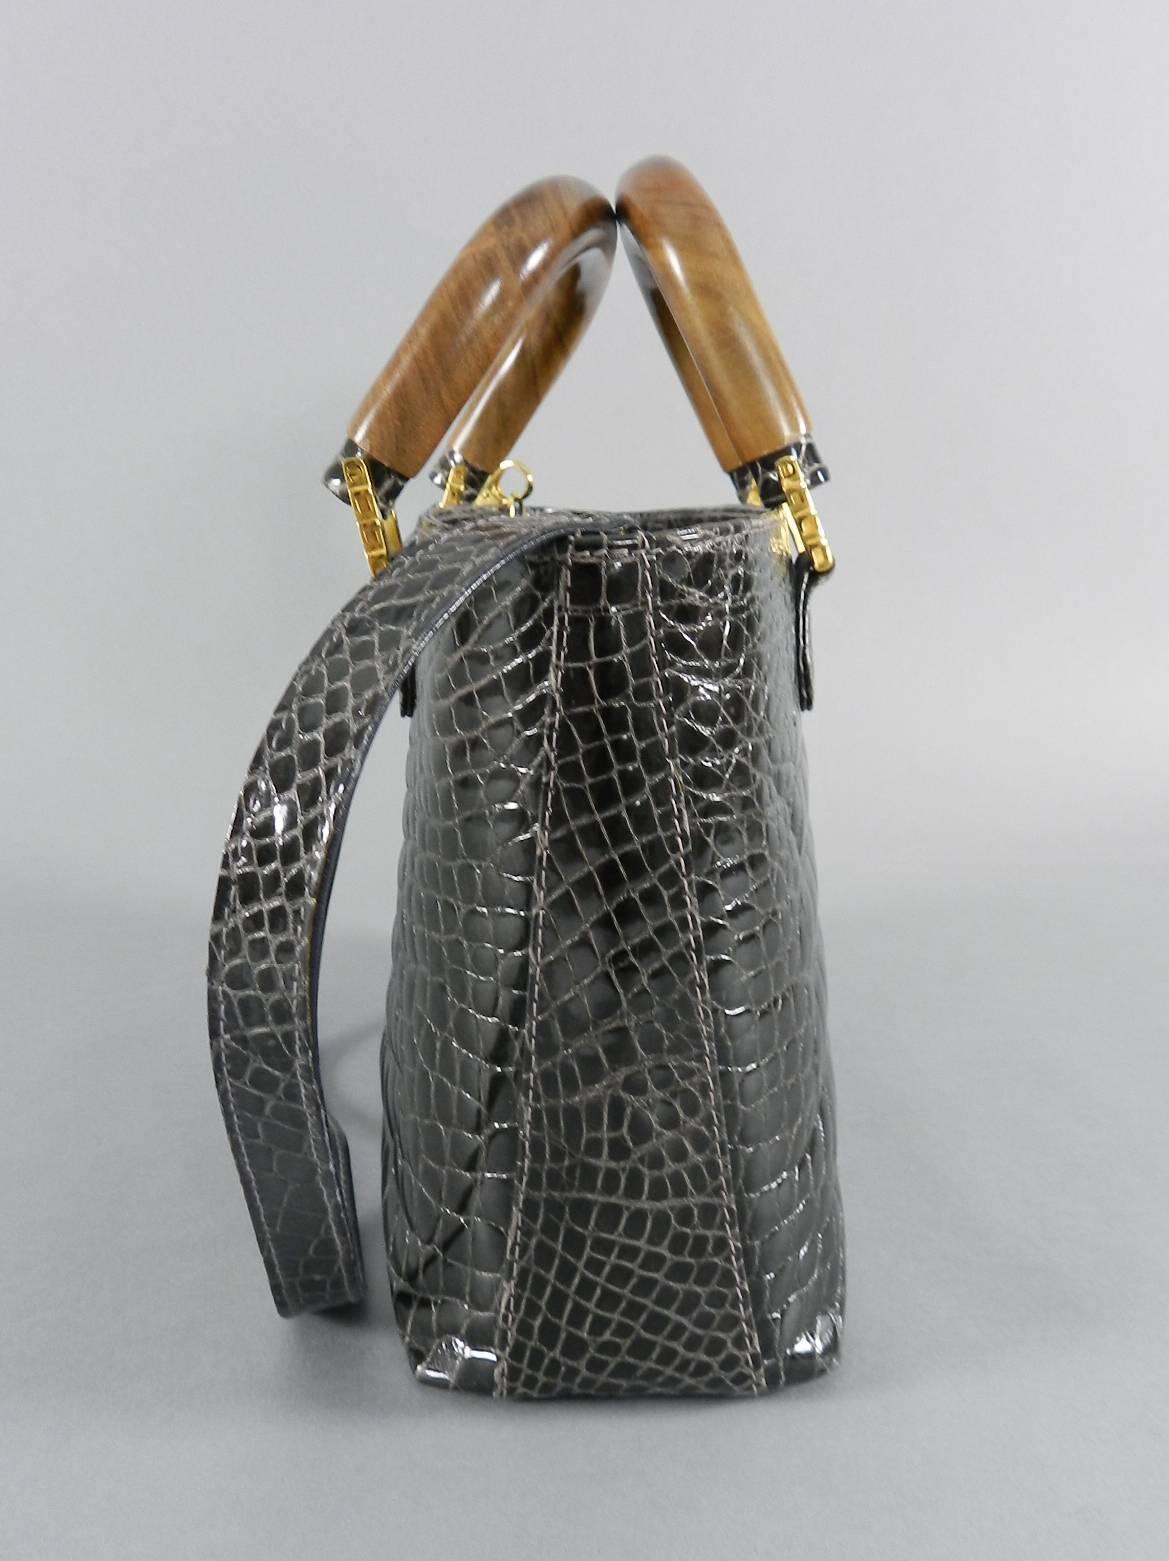 Lana Marks Dark Grey Crocodile Bag with Wood Handles In Excellent Condition For Sale In Toronto, ON